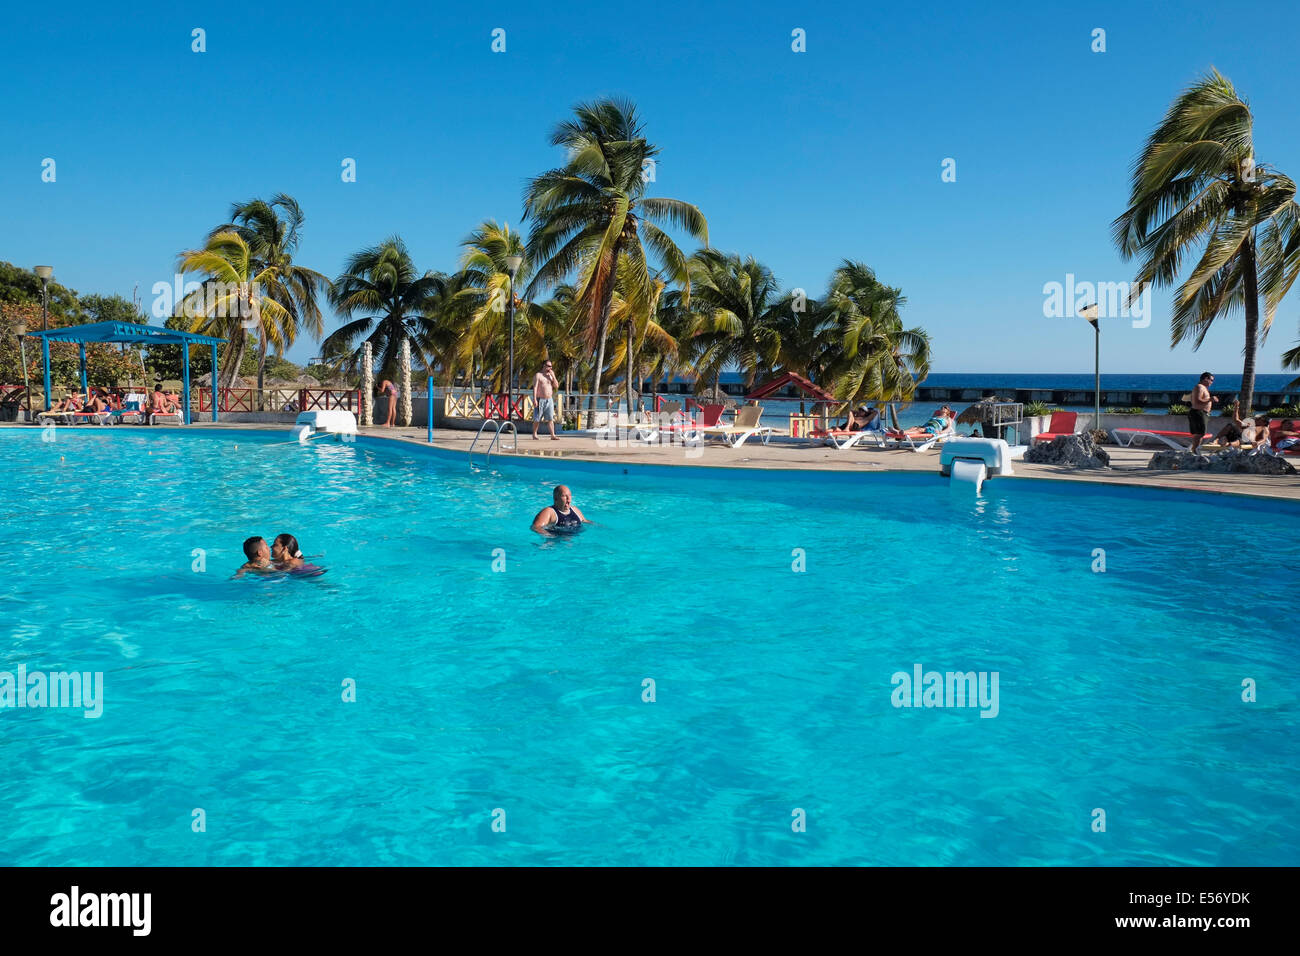 Swimming pool at the Hotel Playa Giron, Cuba, next to the site where US-backed forces landed during the Bay of Pigs invasion. Stock Photo